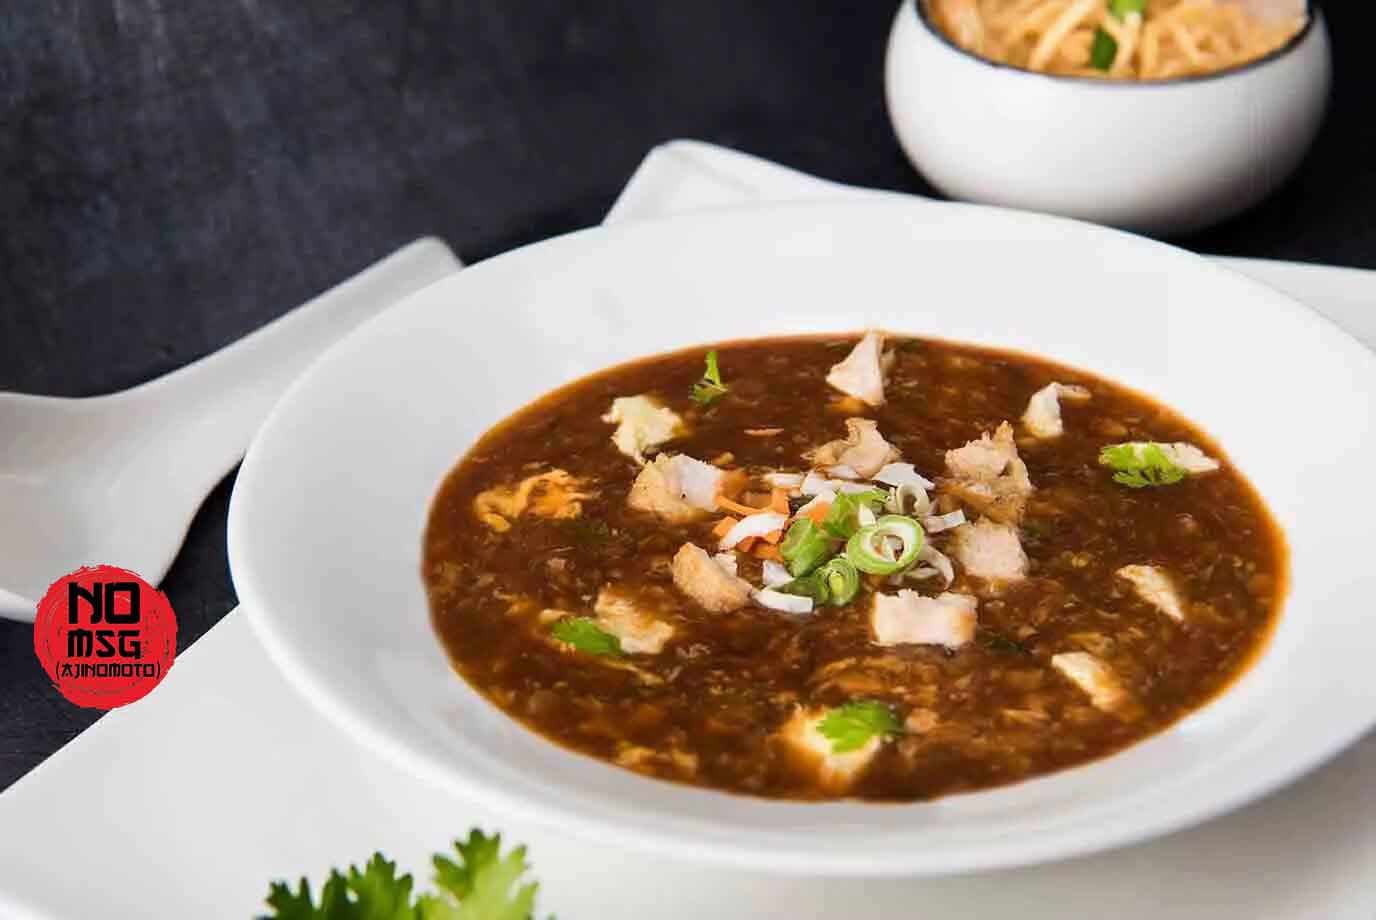 Manchow Soup with Shredded Chicken